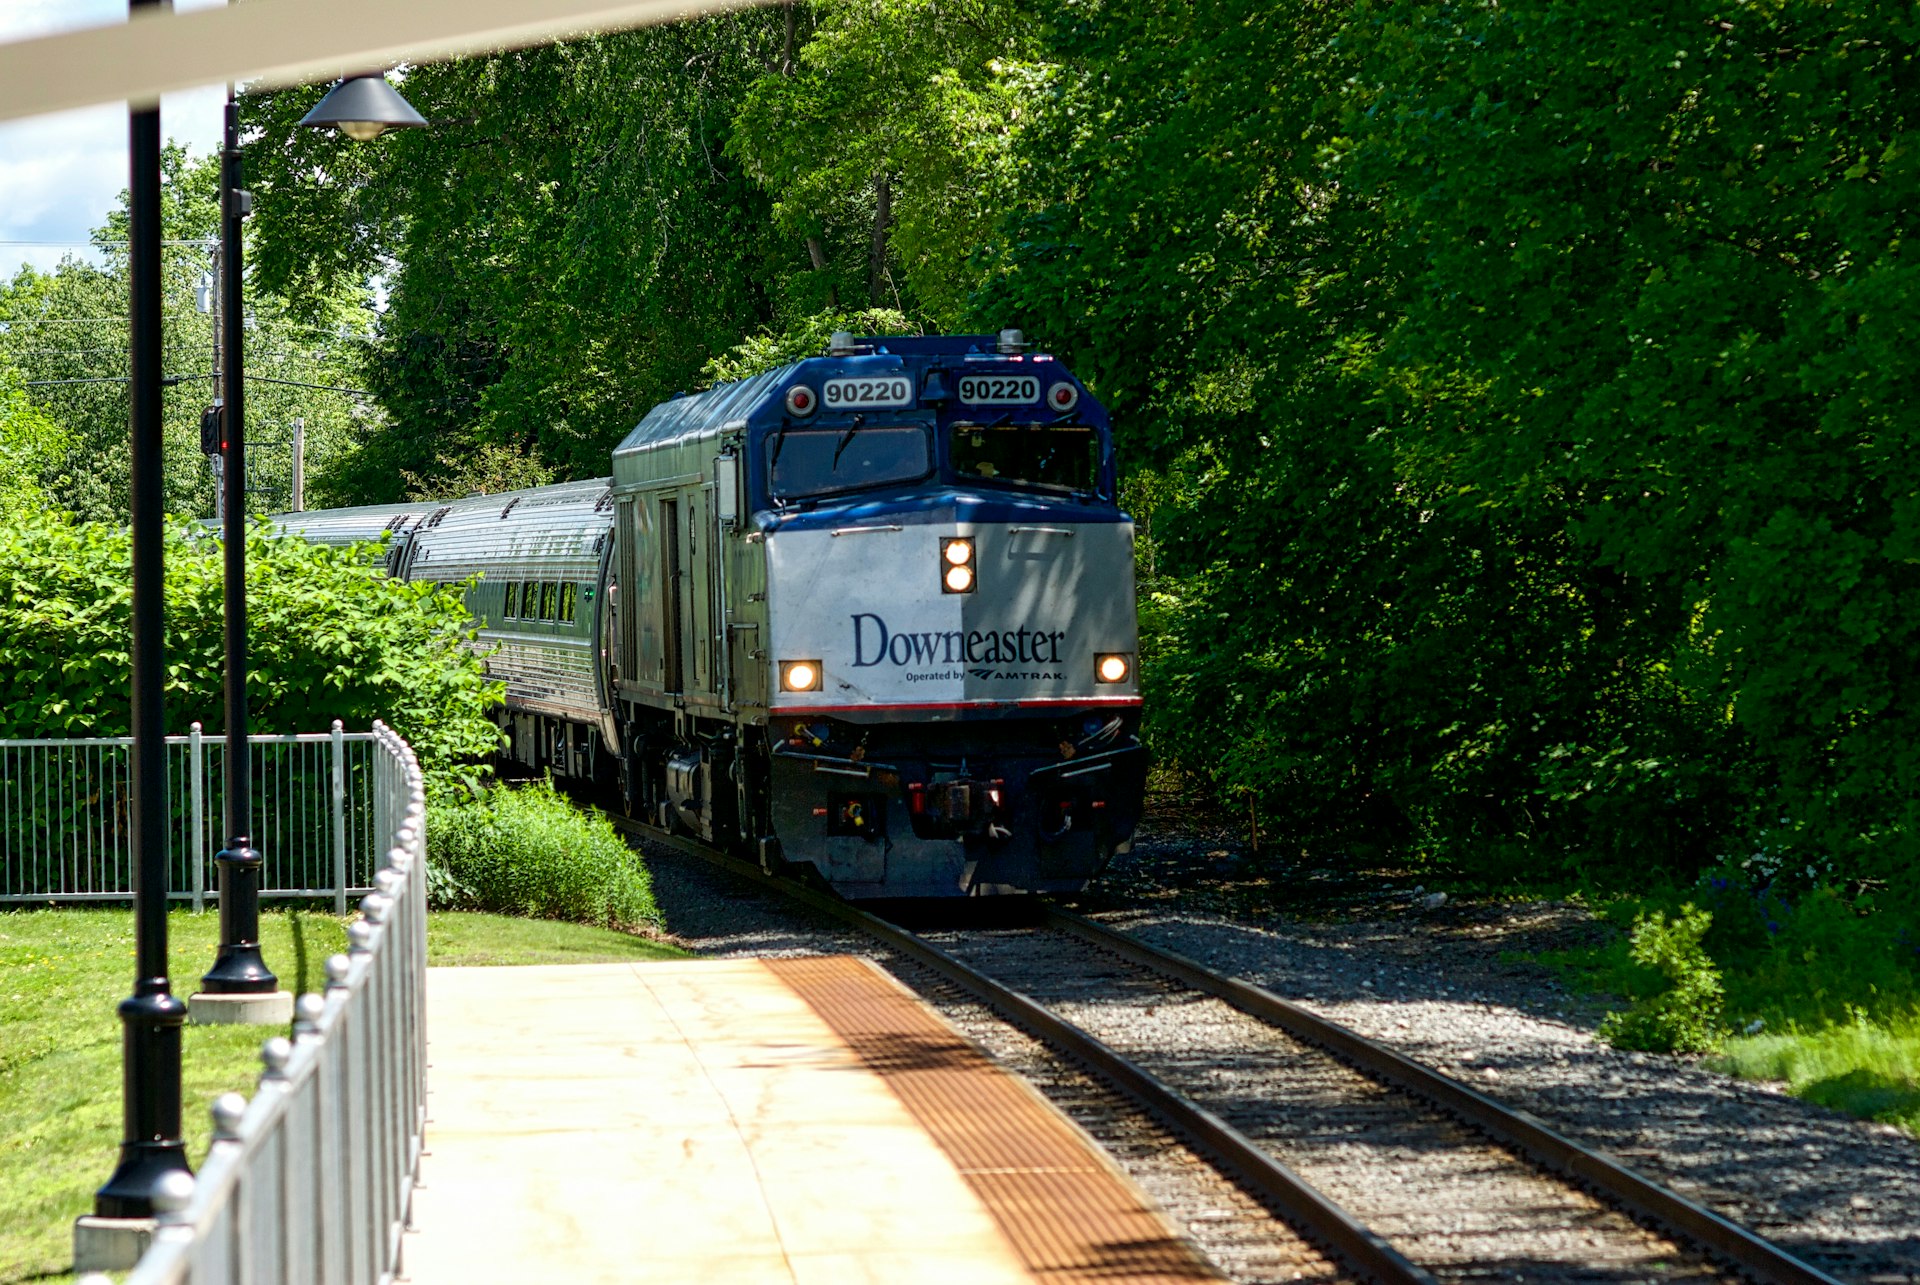 Amtrak's Downeaster train arrives at the Freeport Station to pick up passengers on its route South to Boston, Massachusetts